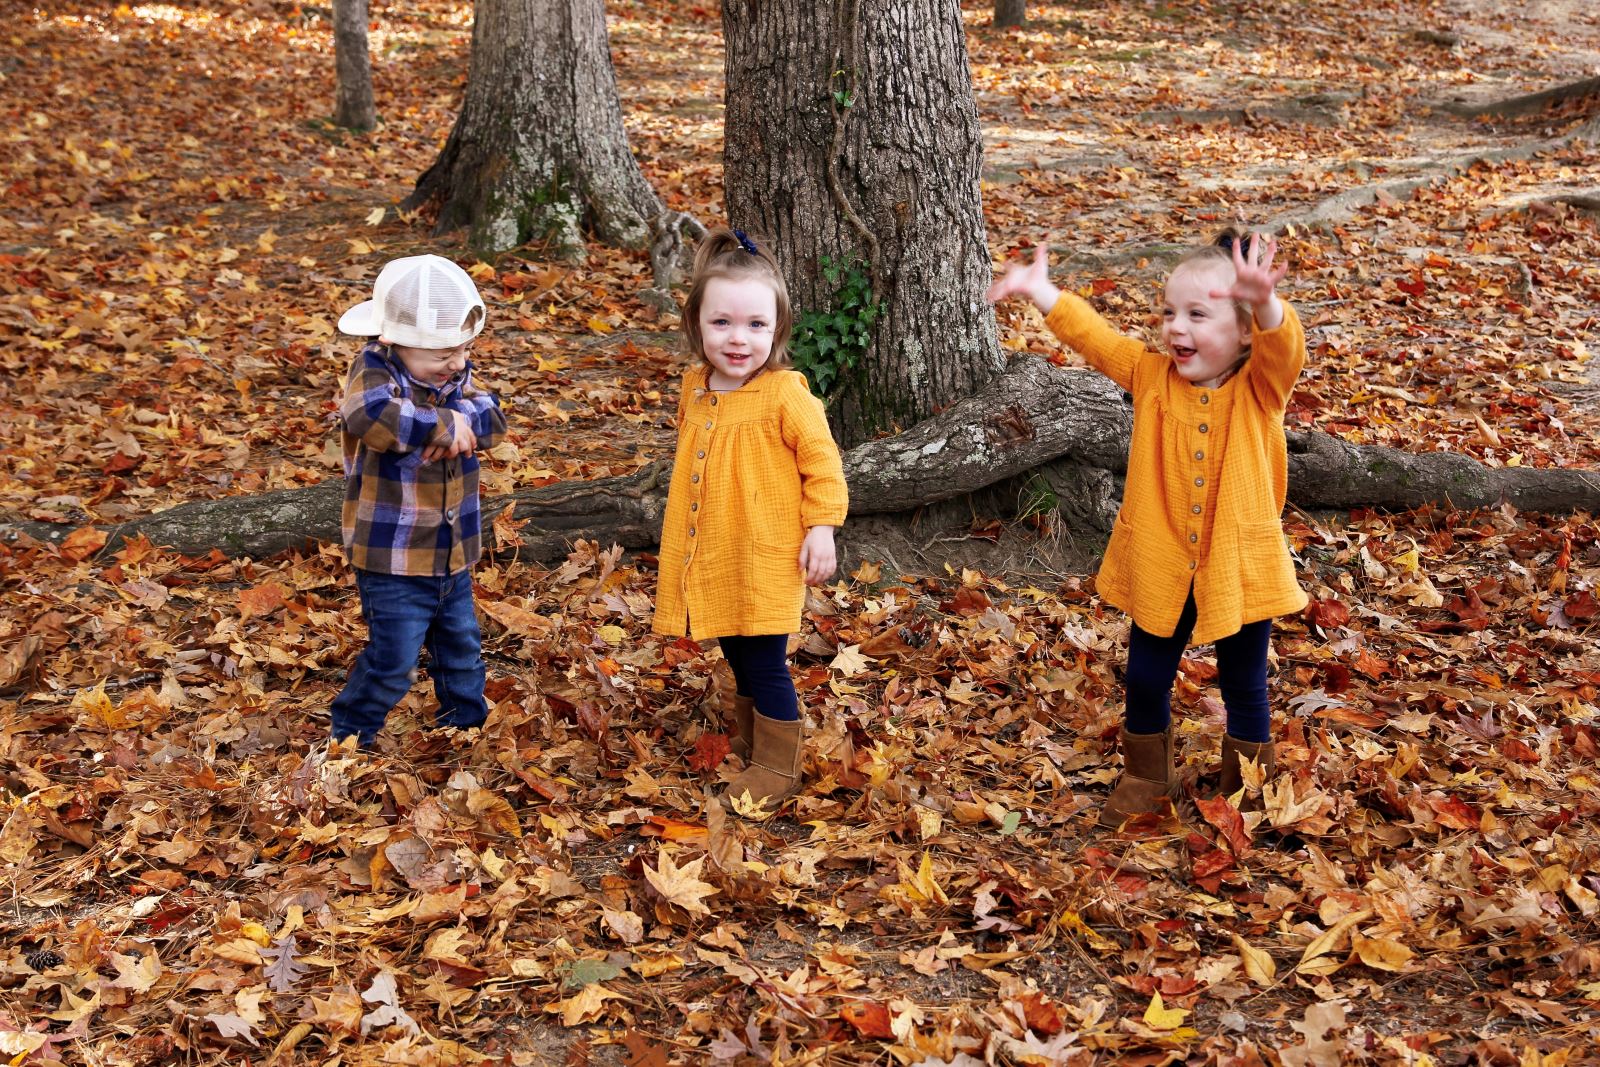 Turnmire triplets playing in the leaves